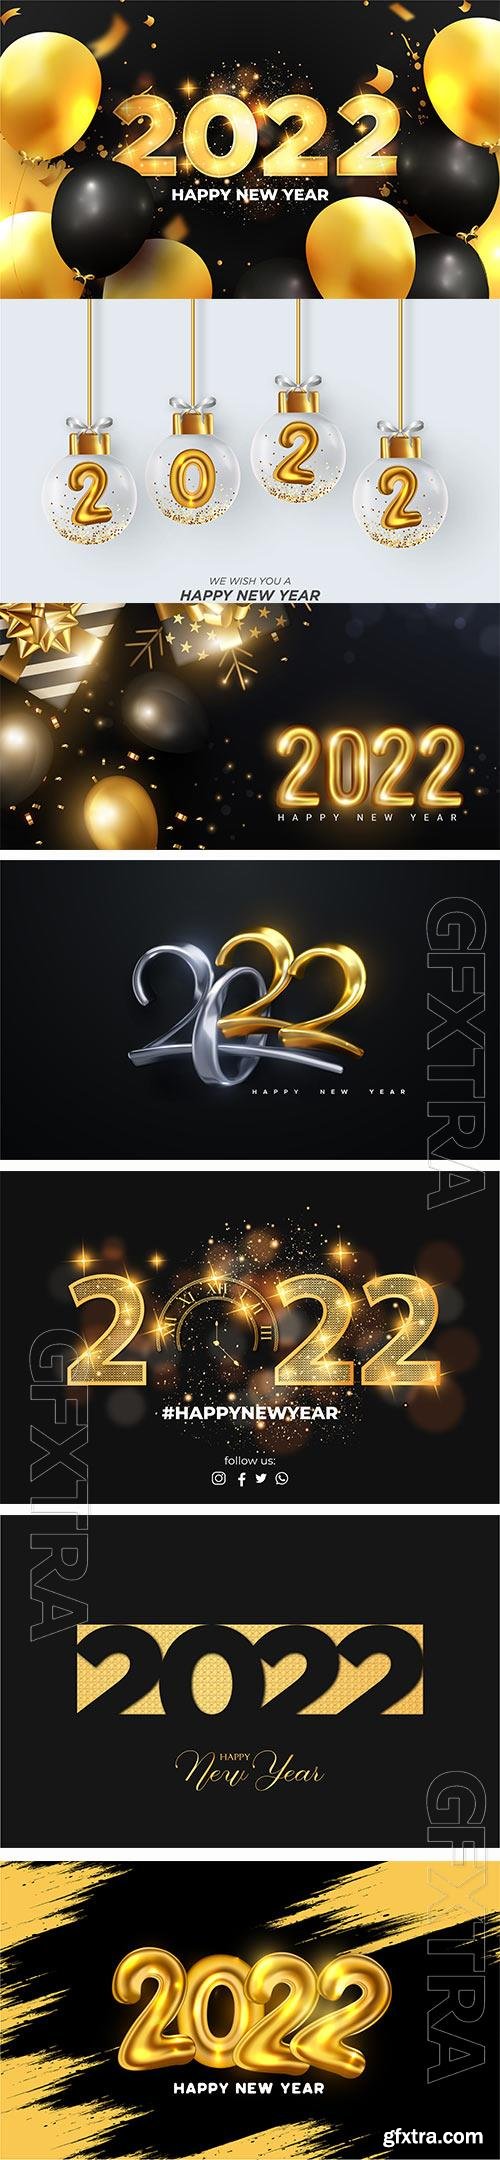 2022 number made by sparkle lights with golden swirl ribbons on black background for happy new year concept